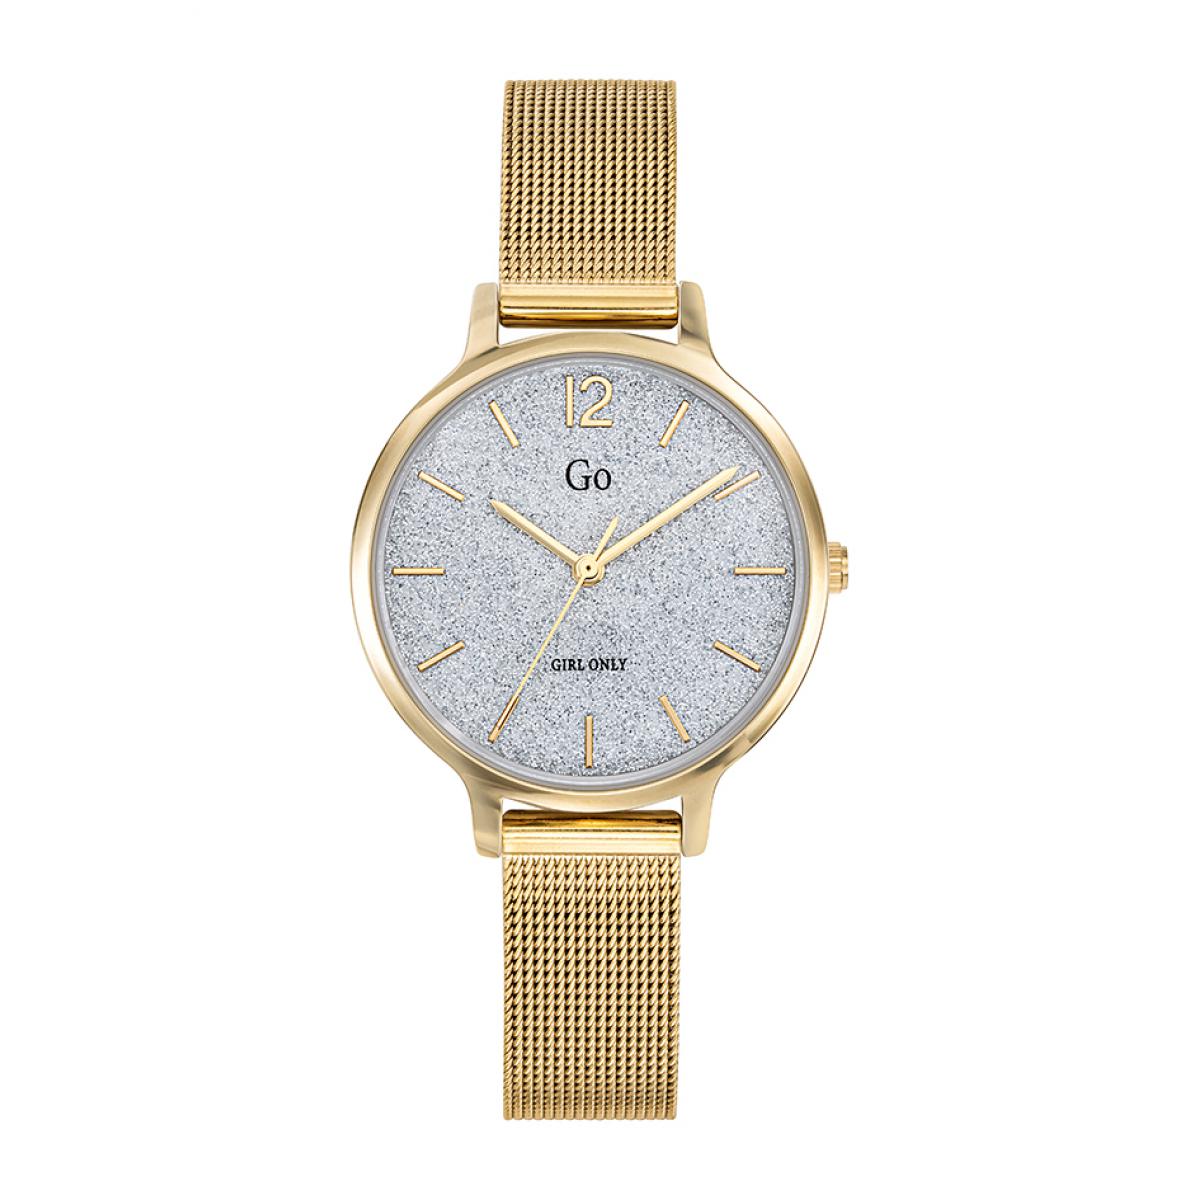 Go Girl Only Montres 695234